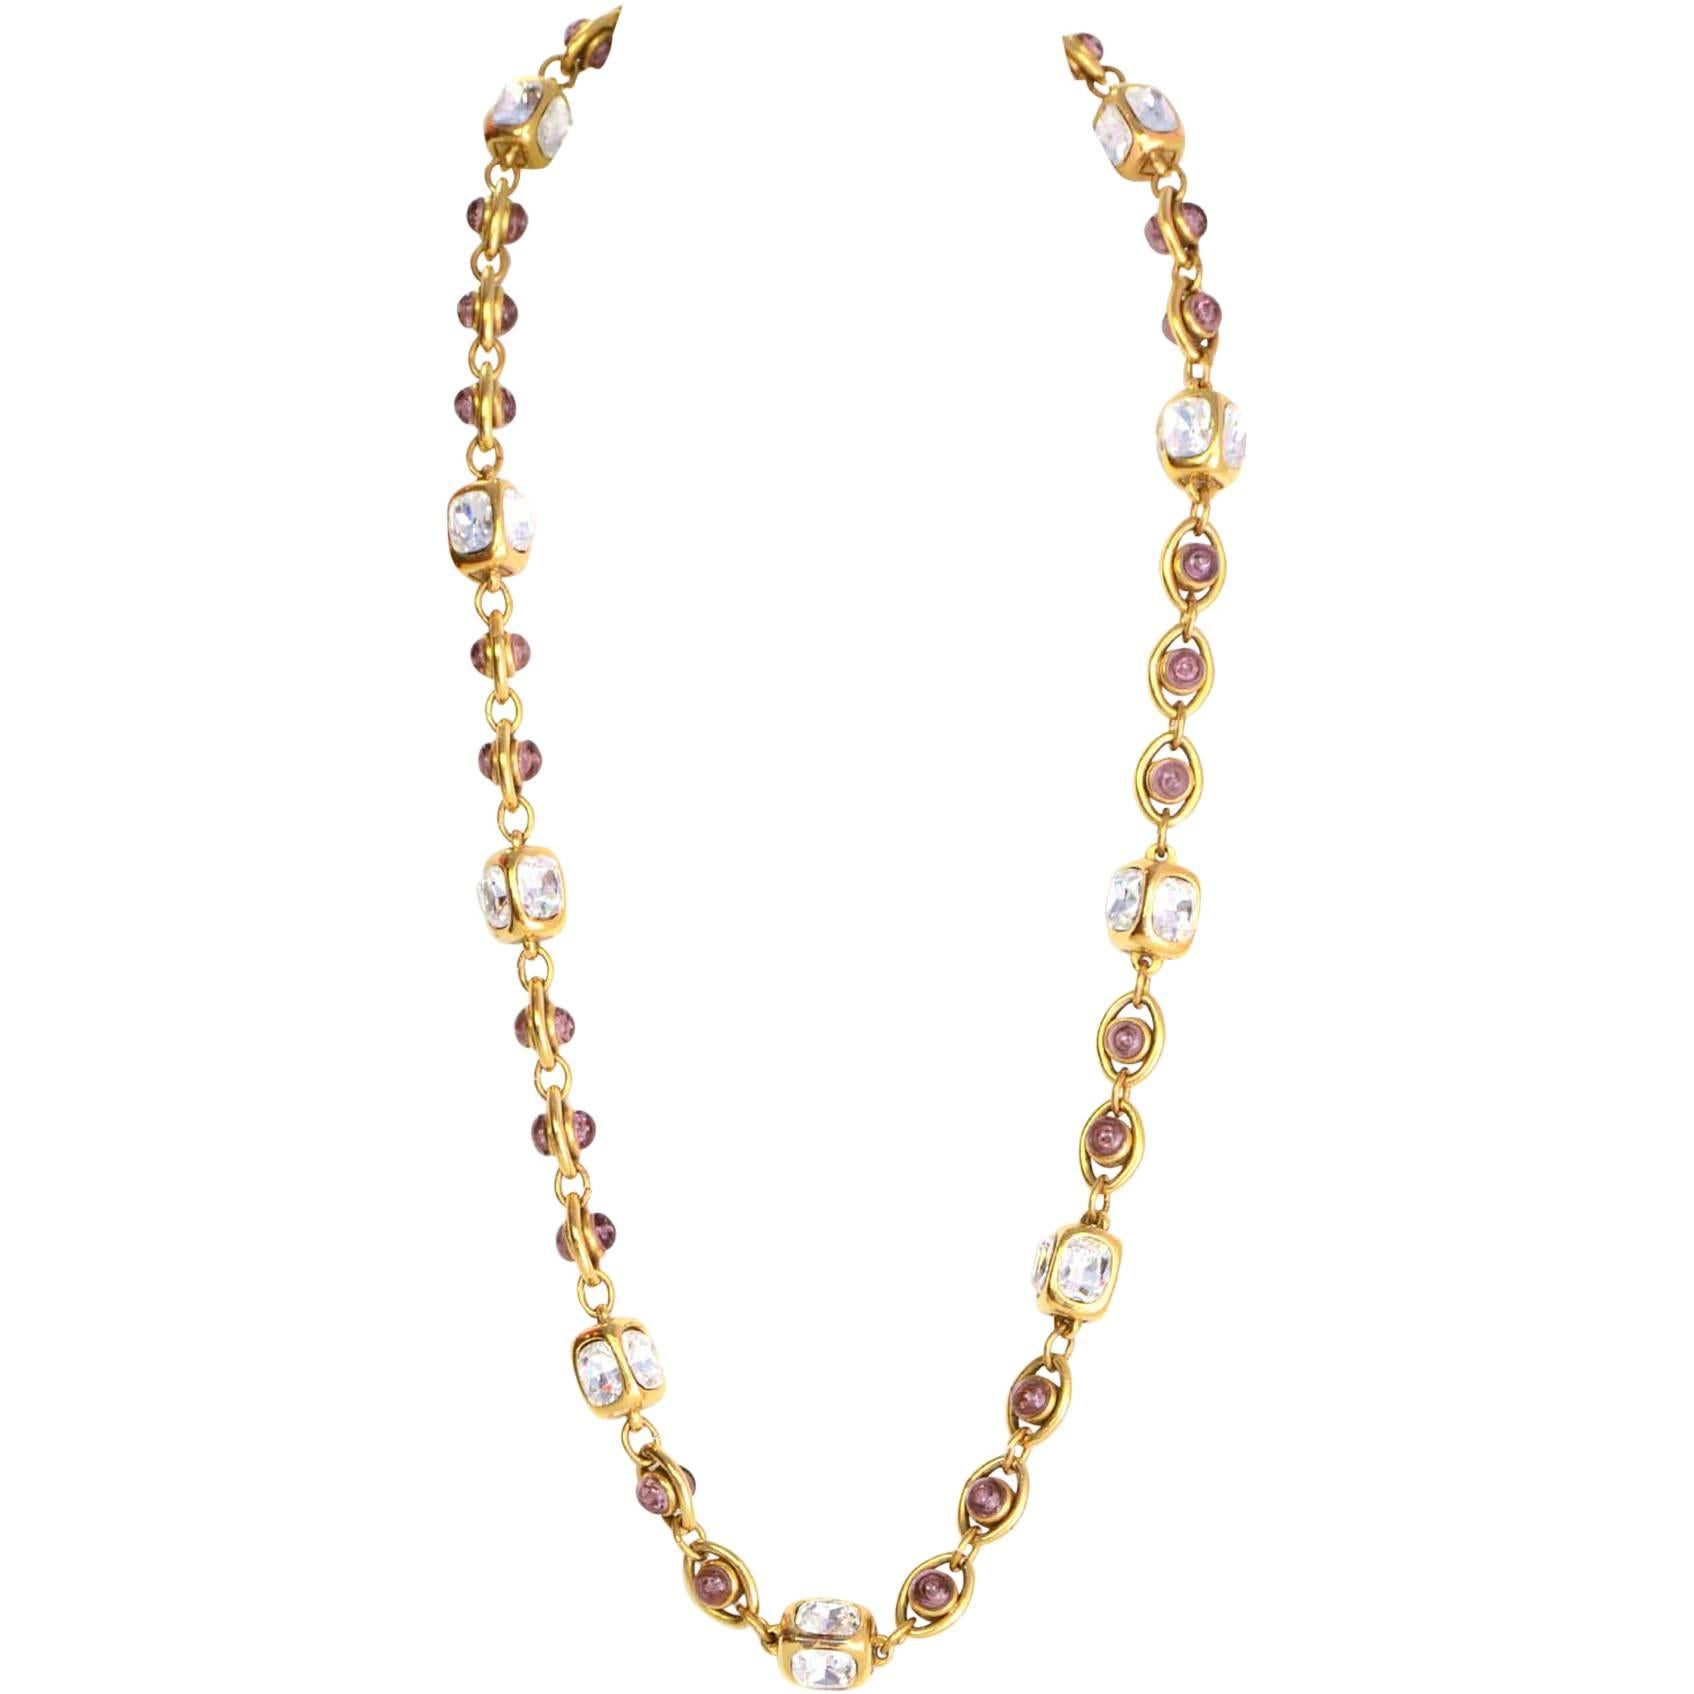 Chanel Purple Gripoix & Crystal Necklace
Features cubes with crystal & circular pendants with gripoix details throughout chain link 
Made In: France
Year of Production: 1986
Color: Goldtone, purple, and clear
Materials: Metal, crystal